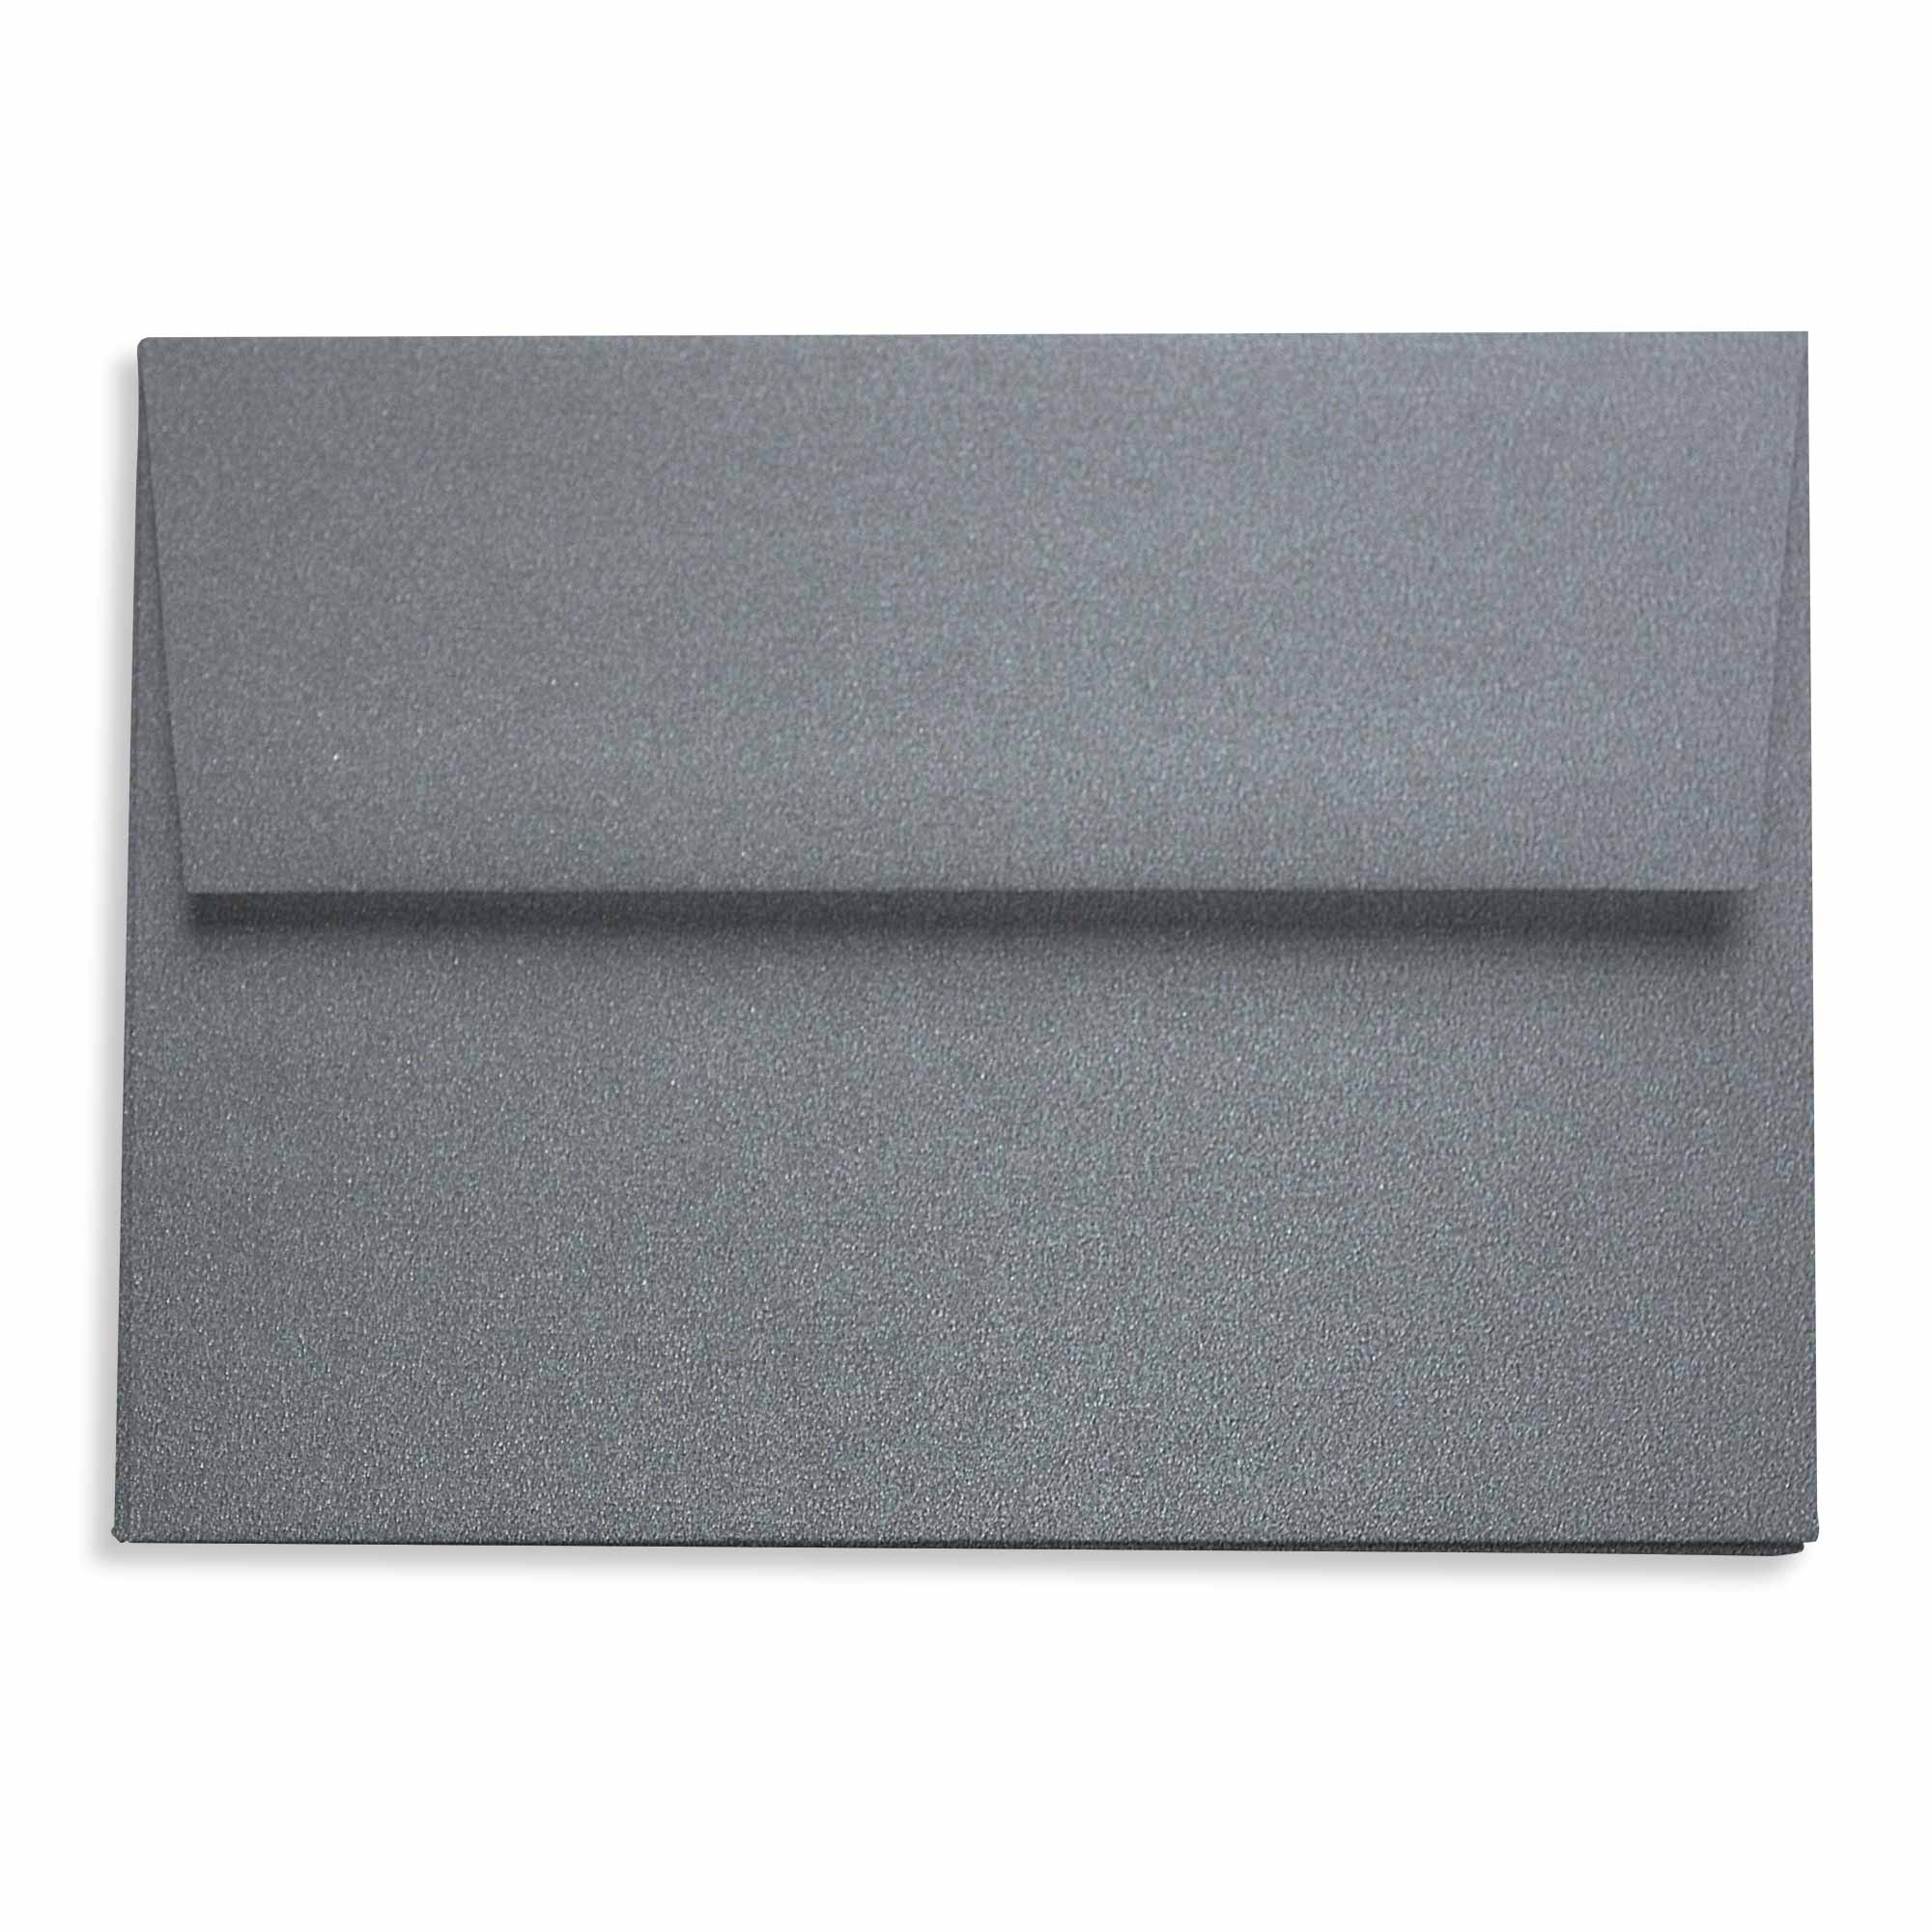 Used 3 Envelopes - A7 Gmund Used Matte 5 1/4 x 7 1/4 Euro Flap 81T